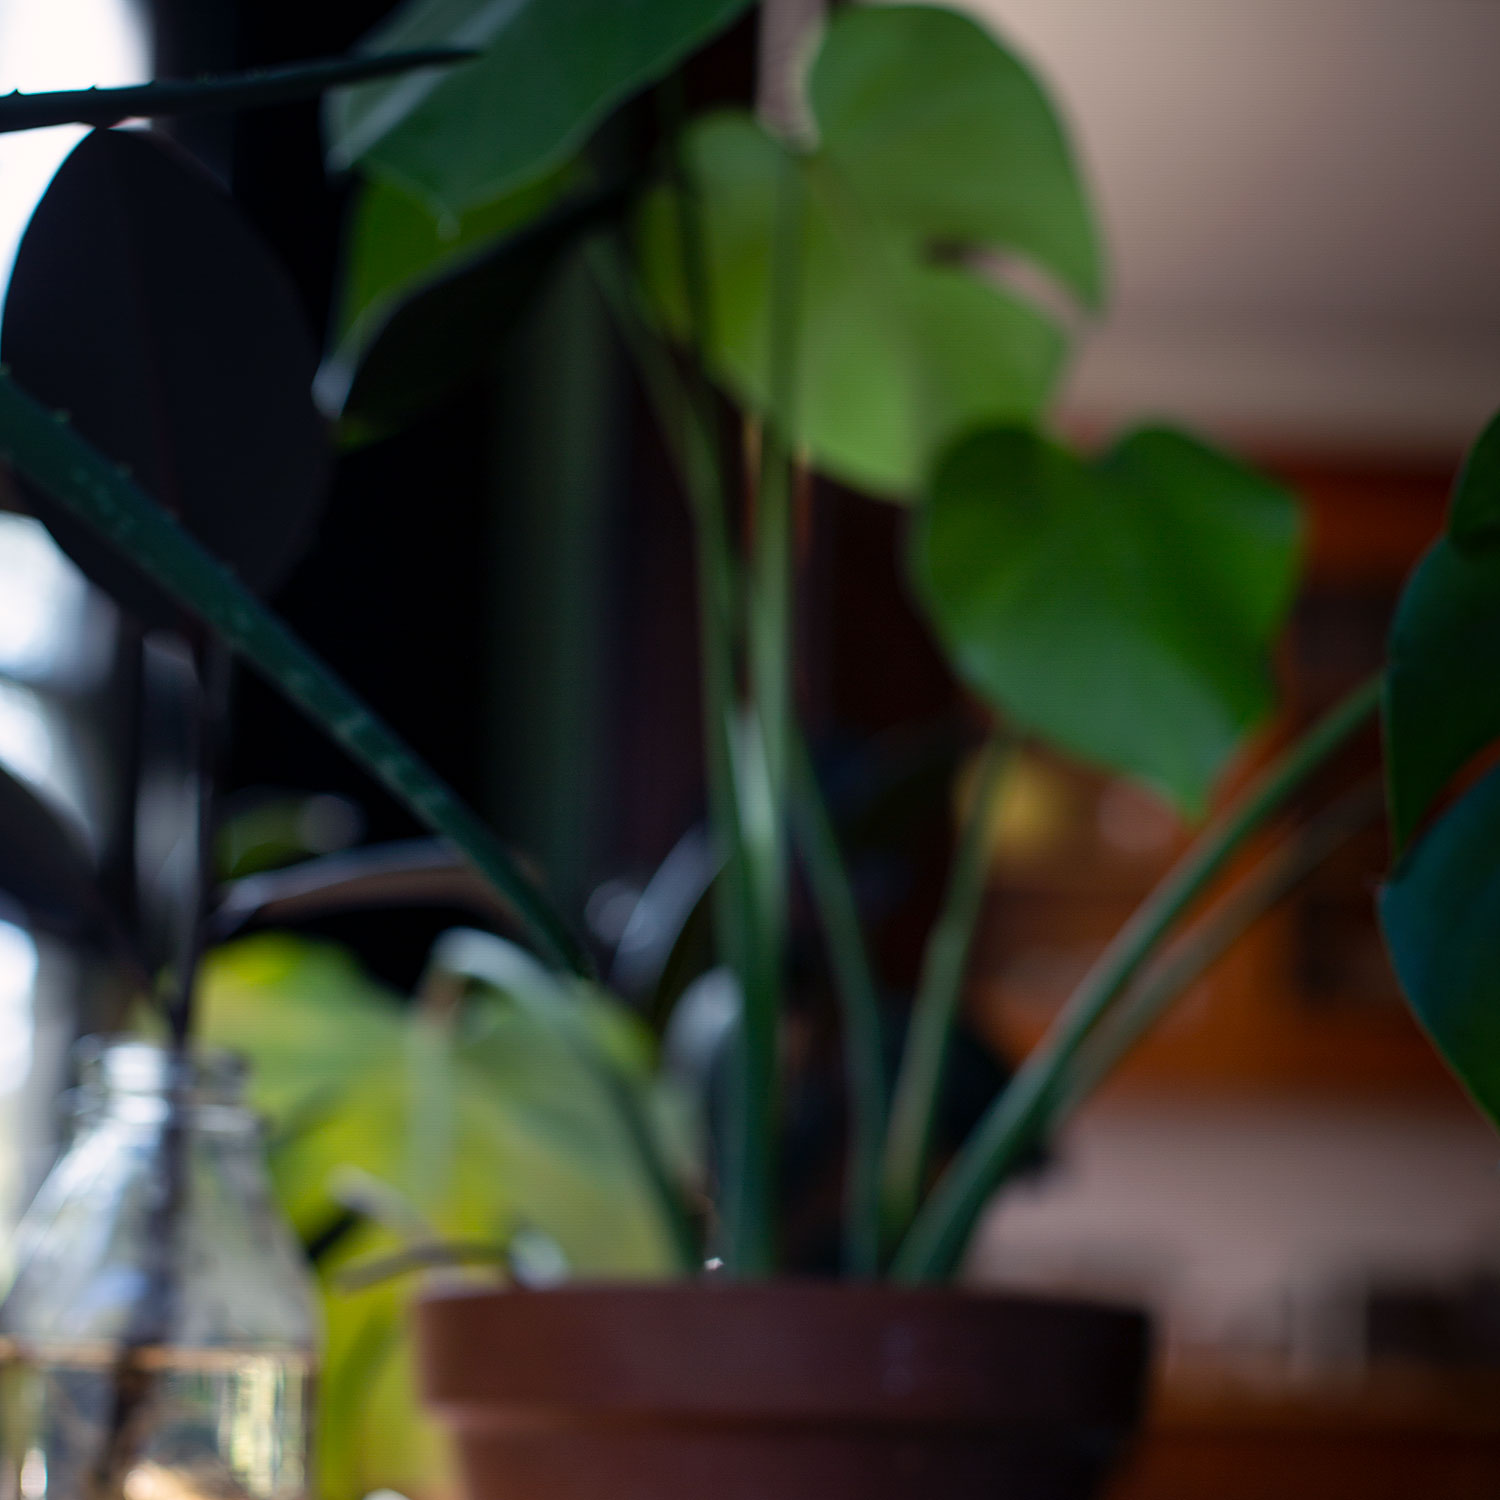 Some out of focus houseplants